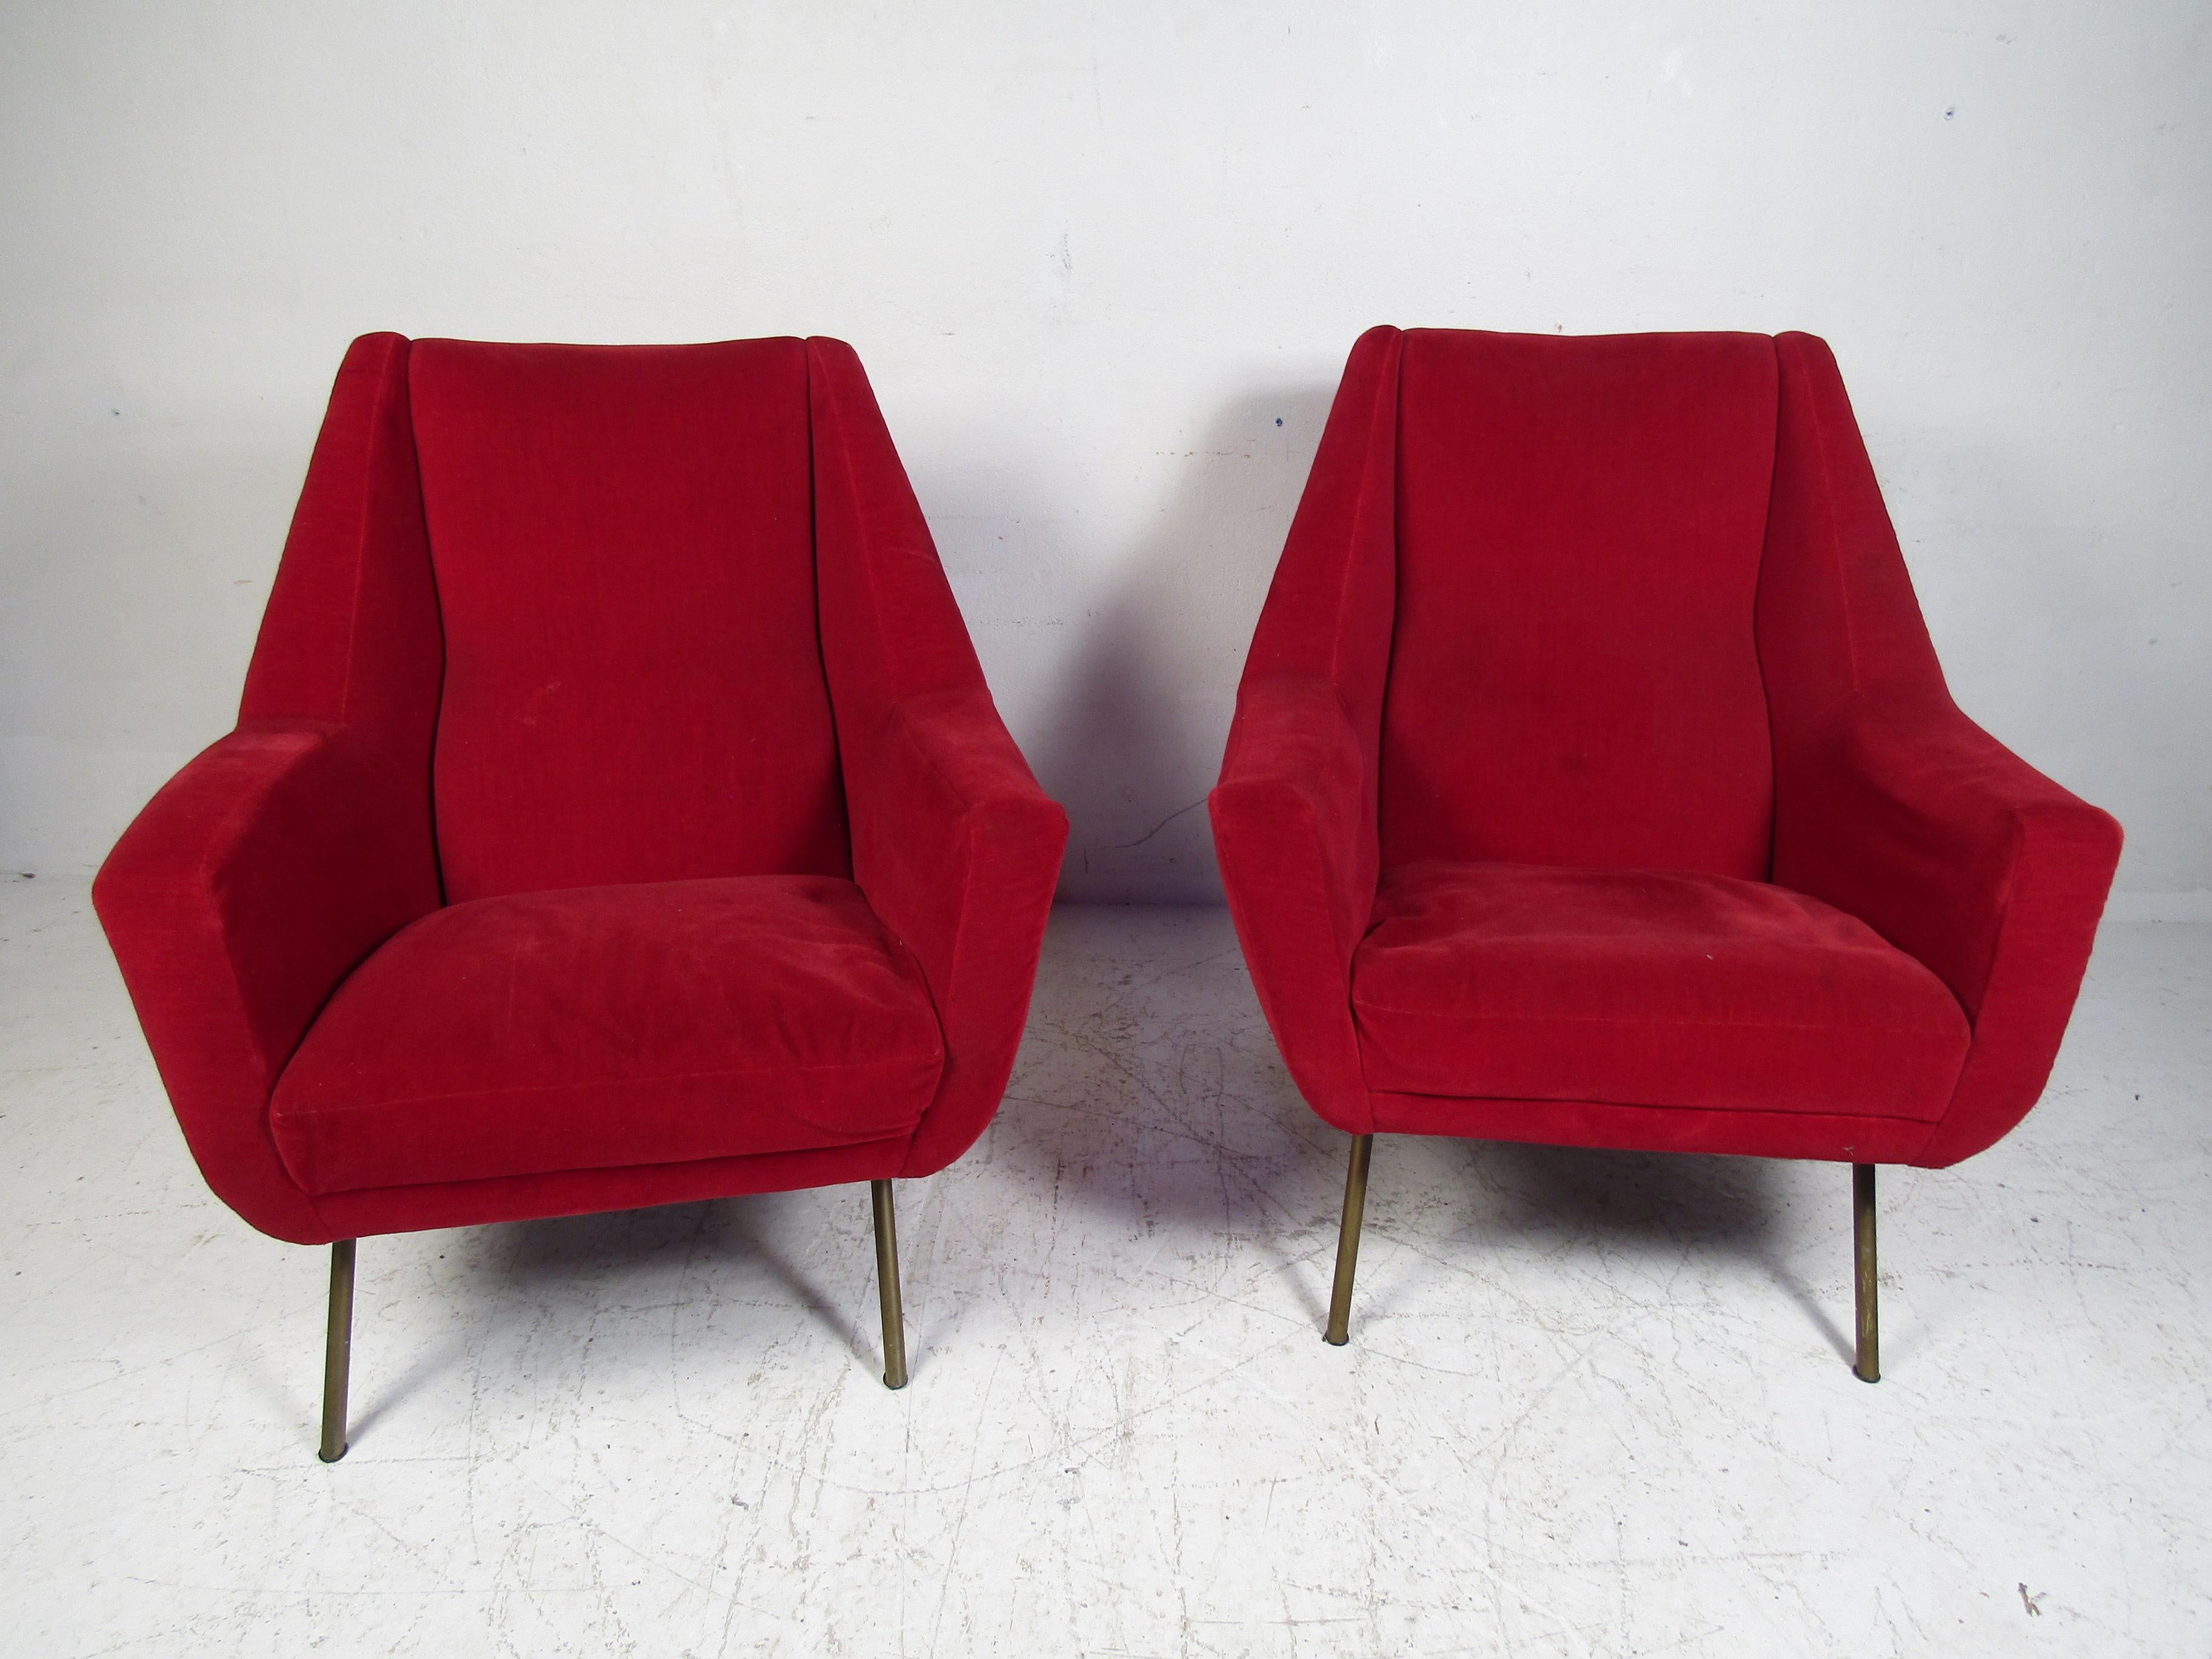 Stylish pair of midcentury lounge chairs. Splayed metal legs support a spacious seating area. Please confirm item location with dealer (NJ or NY).